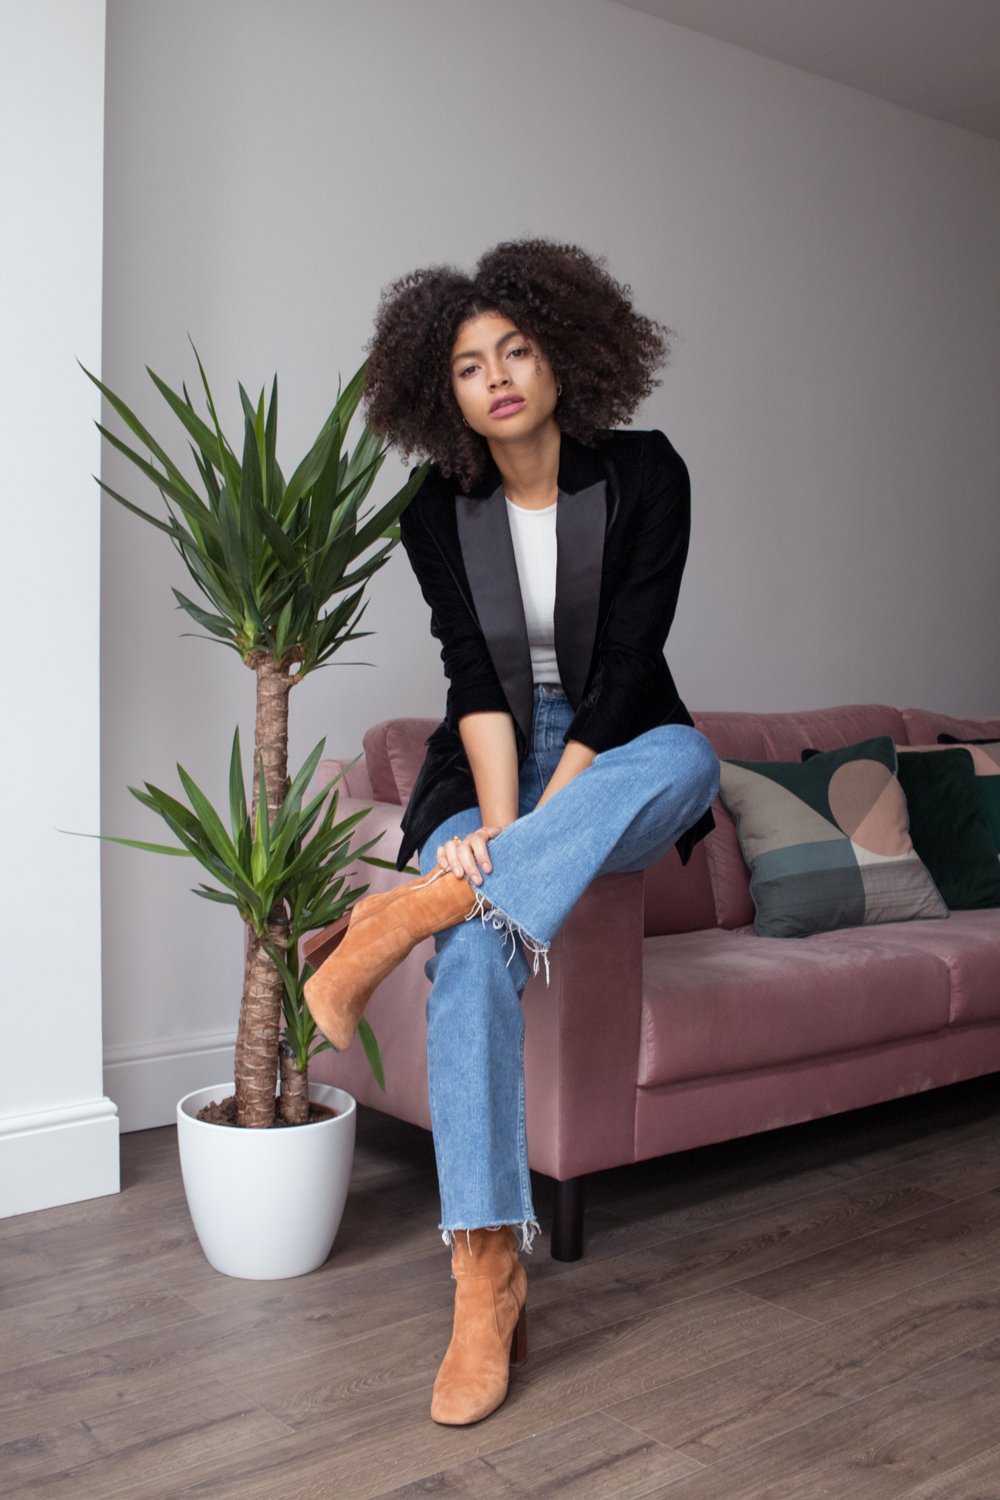 Topshop LFW Black Velvet Tuxedo Blazer and Cropped Denim Flare and Other Stories Jeans Outfit